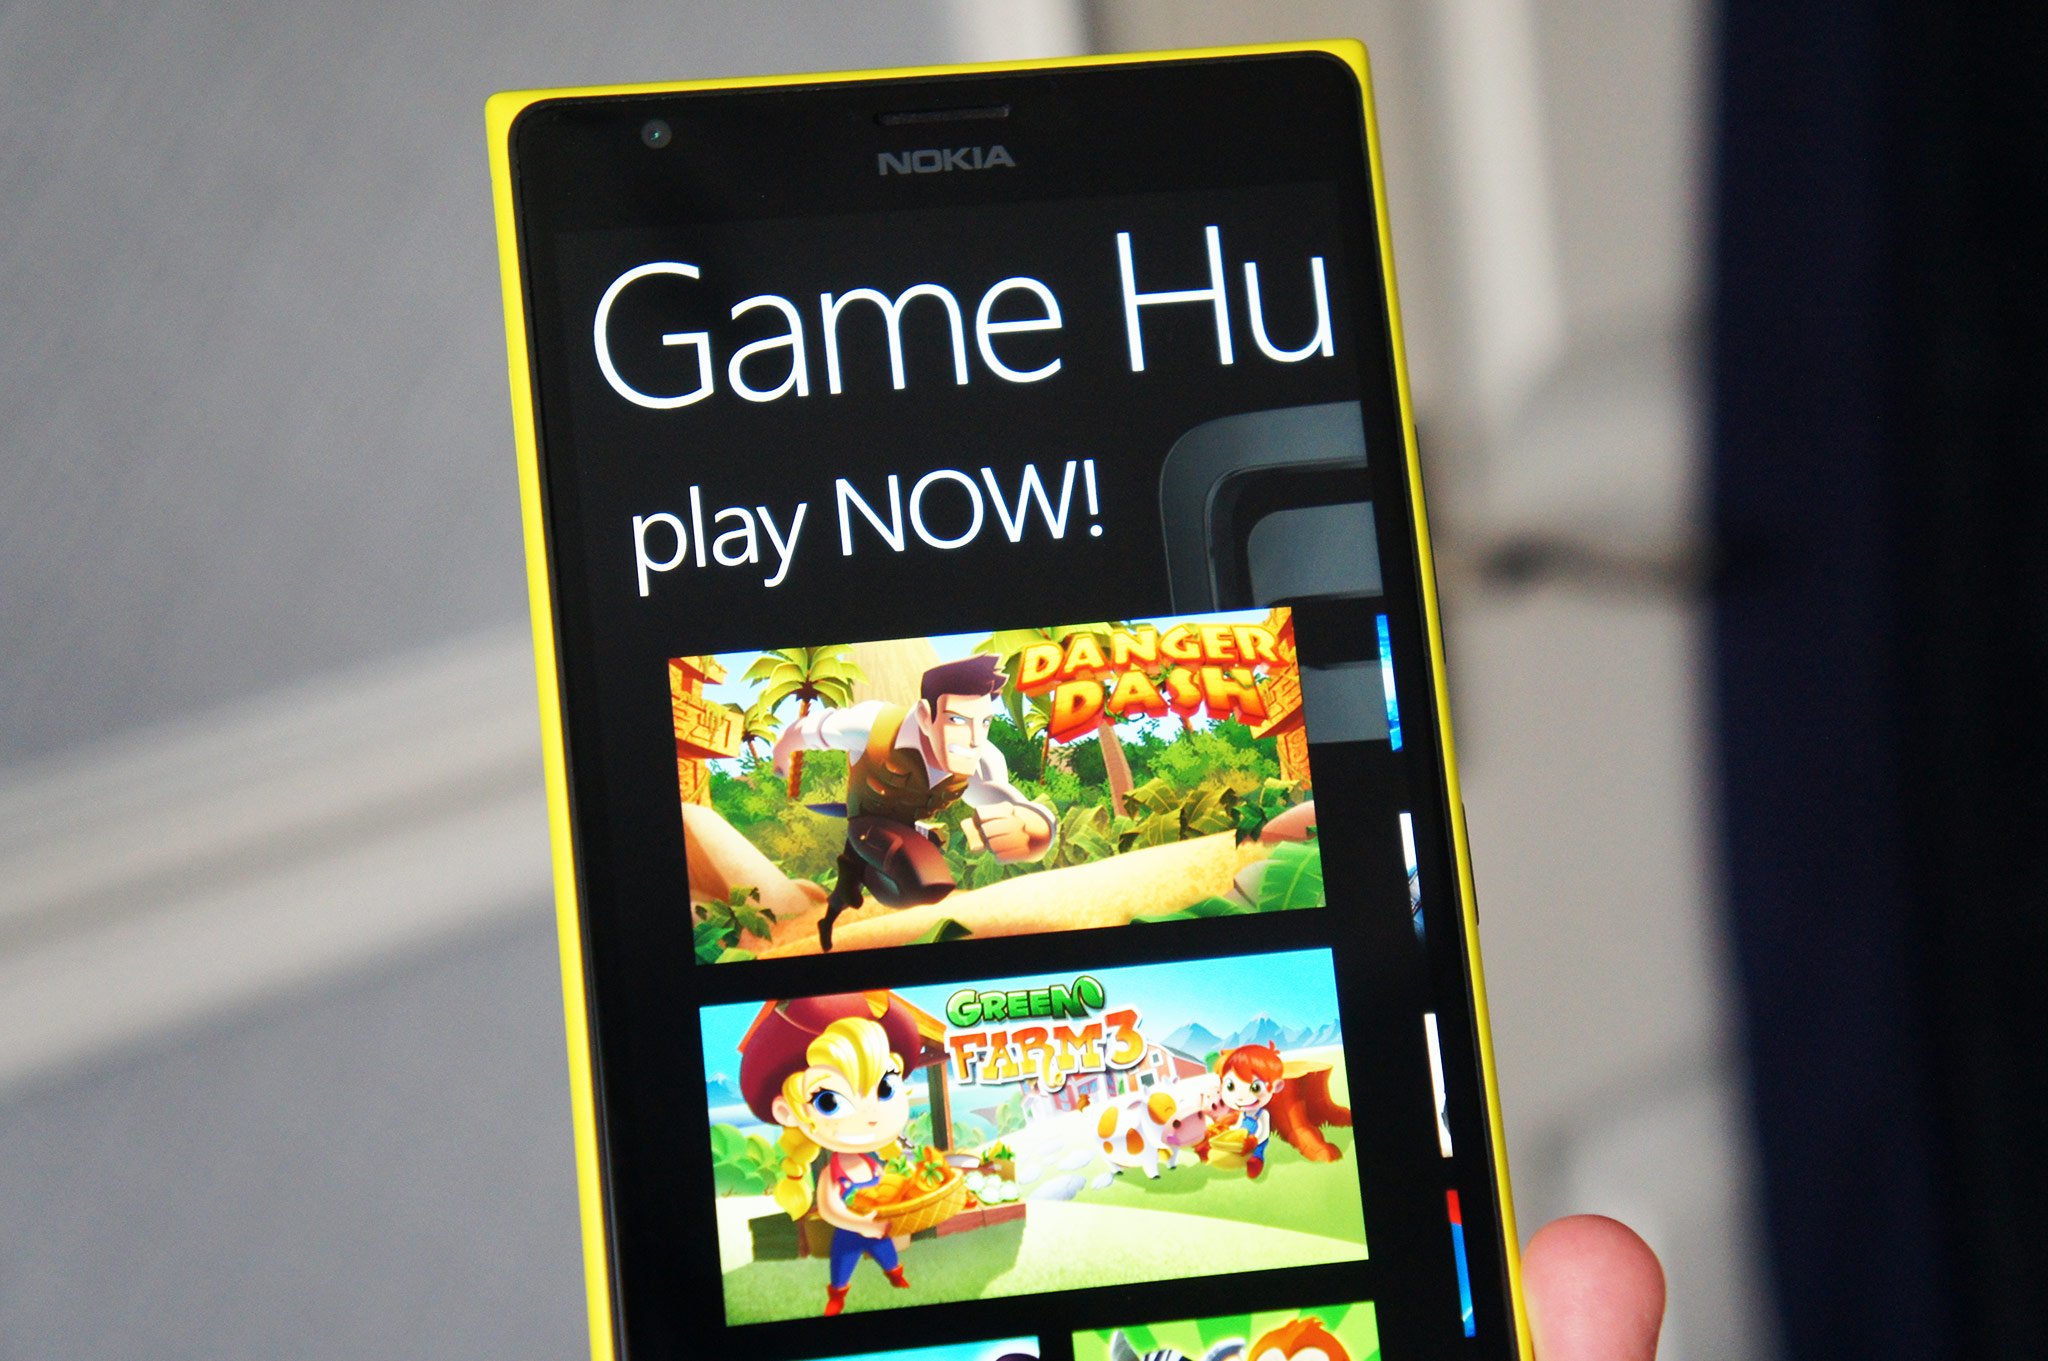 Flip Blox, a Windows Phone game that might surprise you